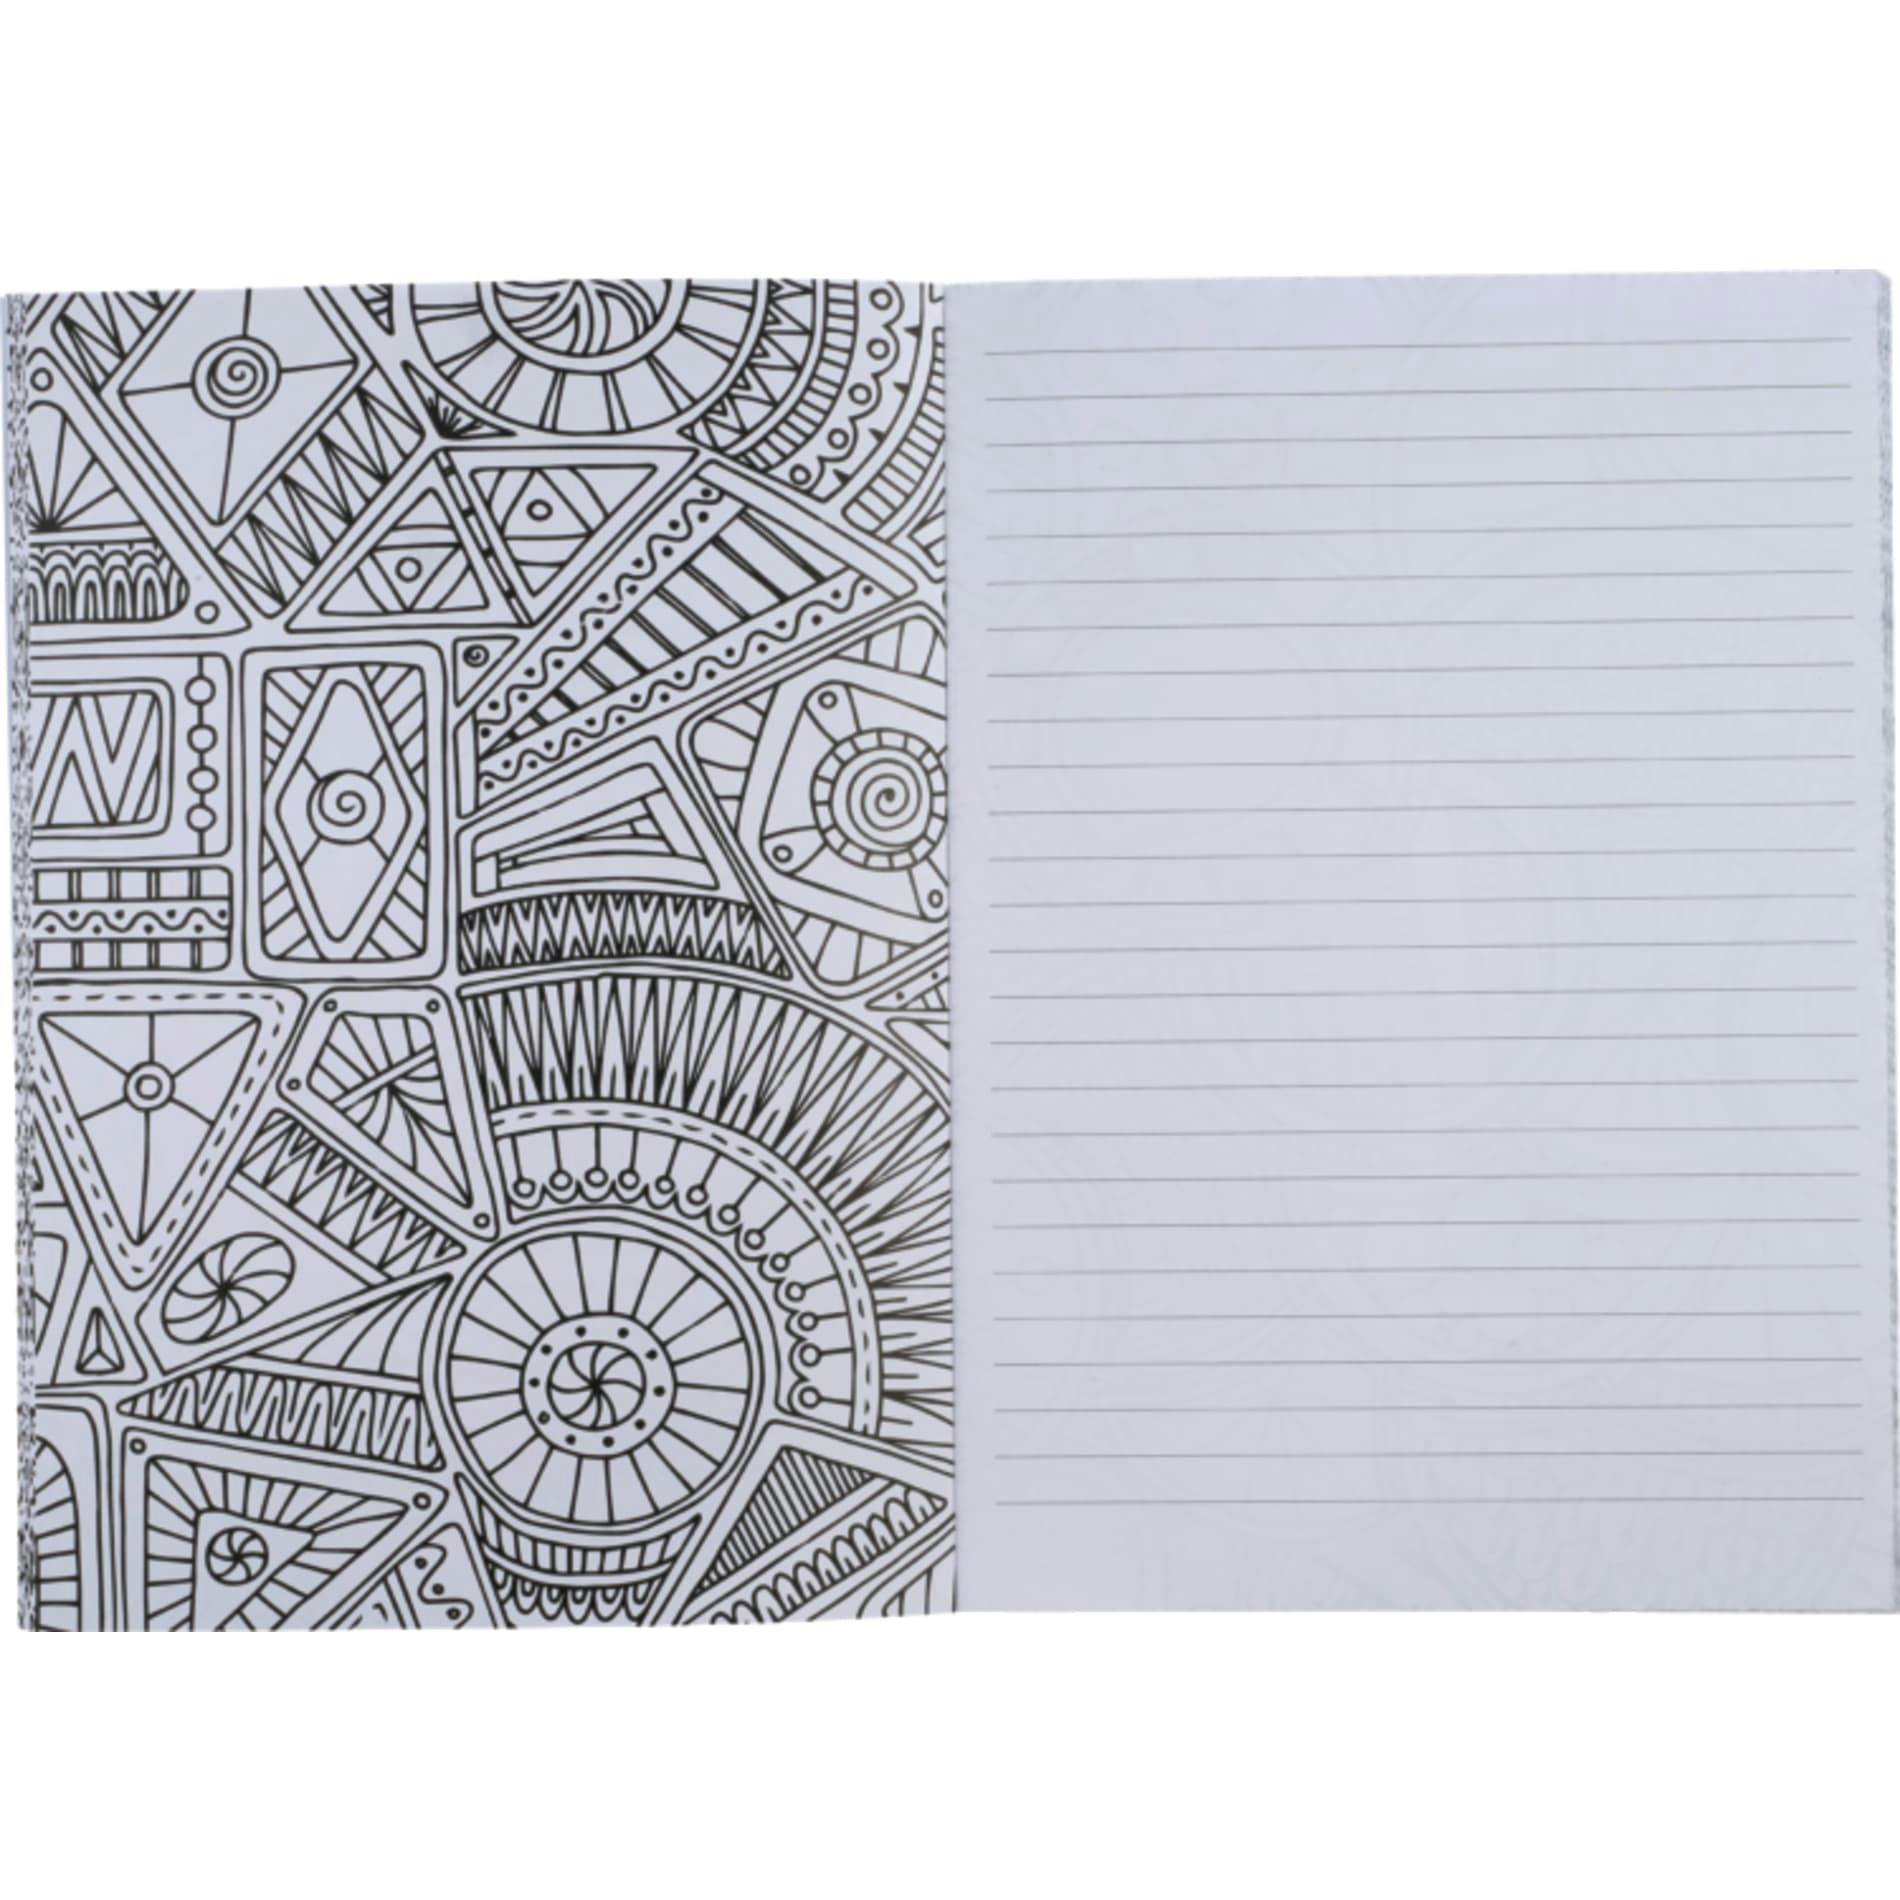 5.5" x 8.5" Doodle Coloring Notebook - additional Image 1